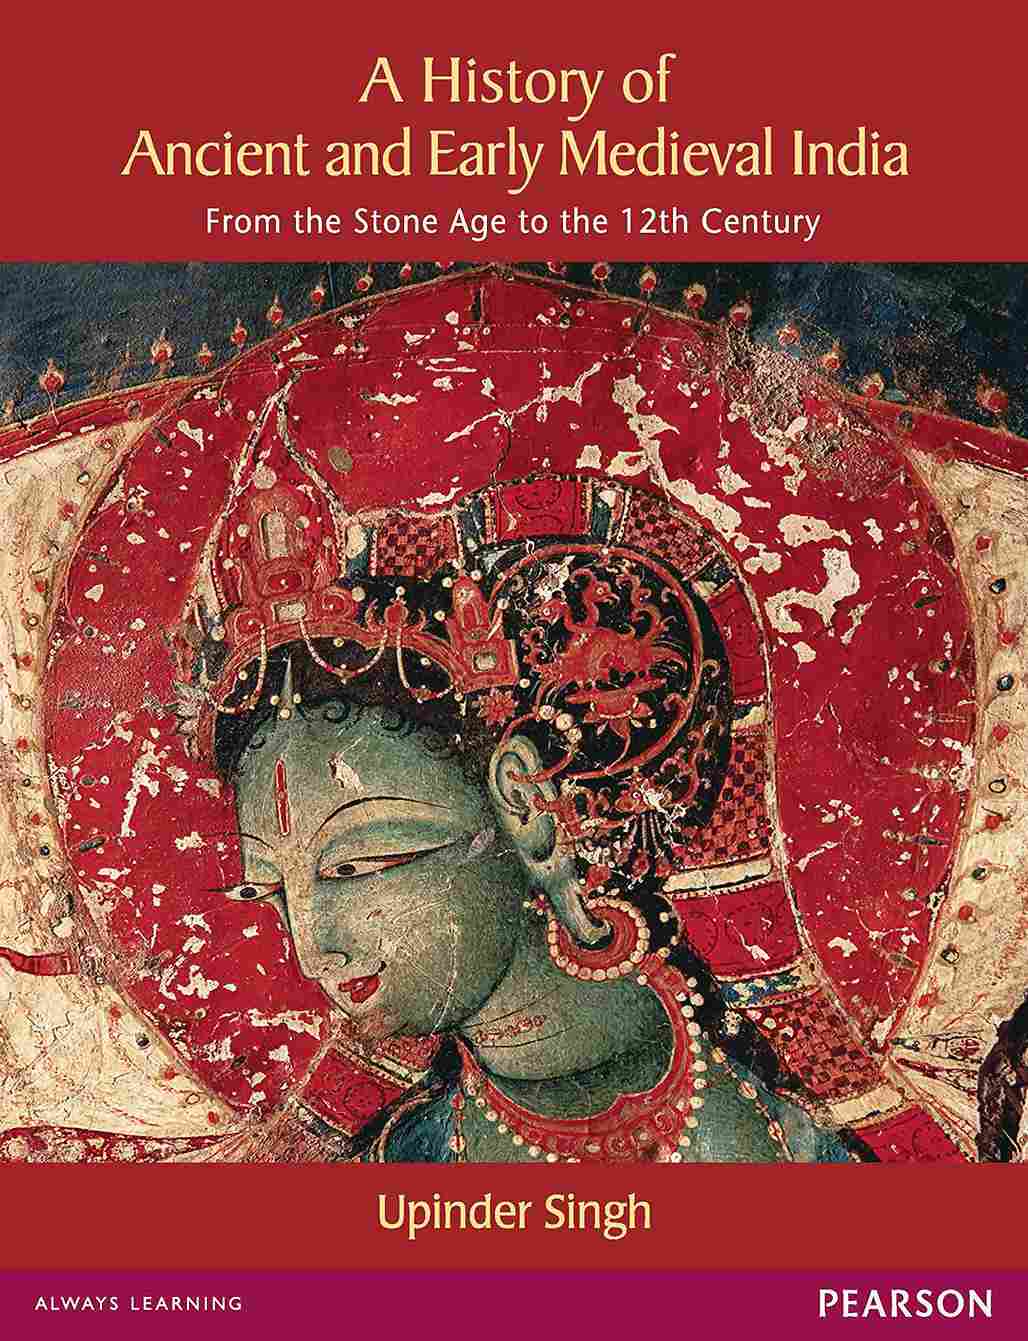 A History of Ancient and Early Medieval India by Upinder Singh 
